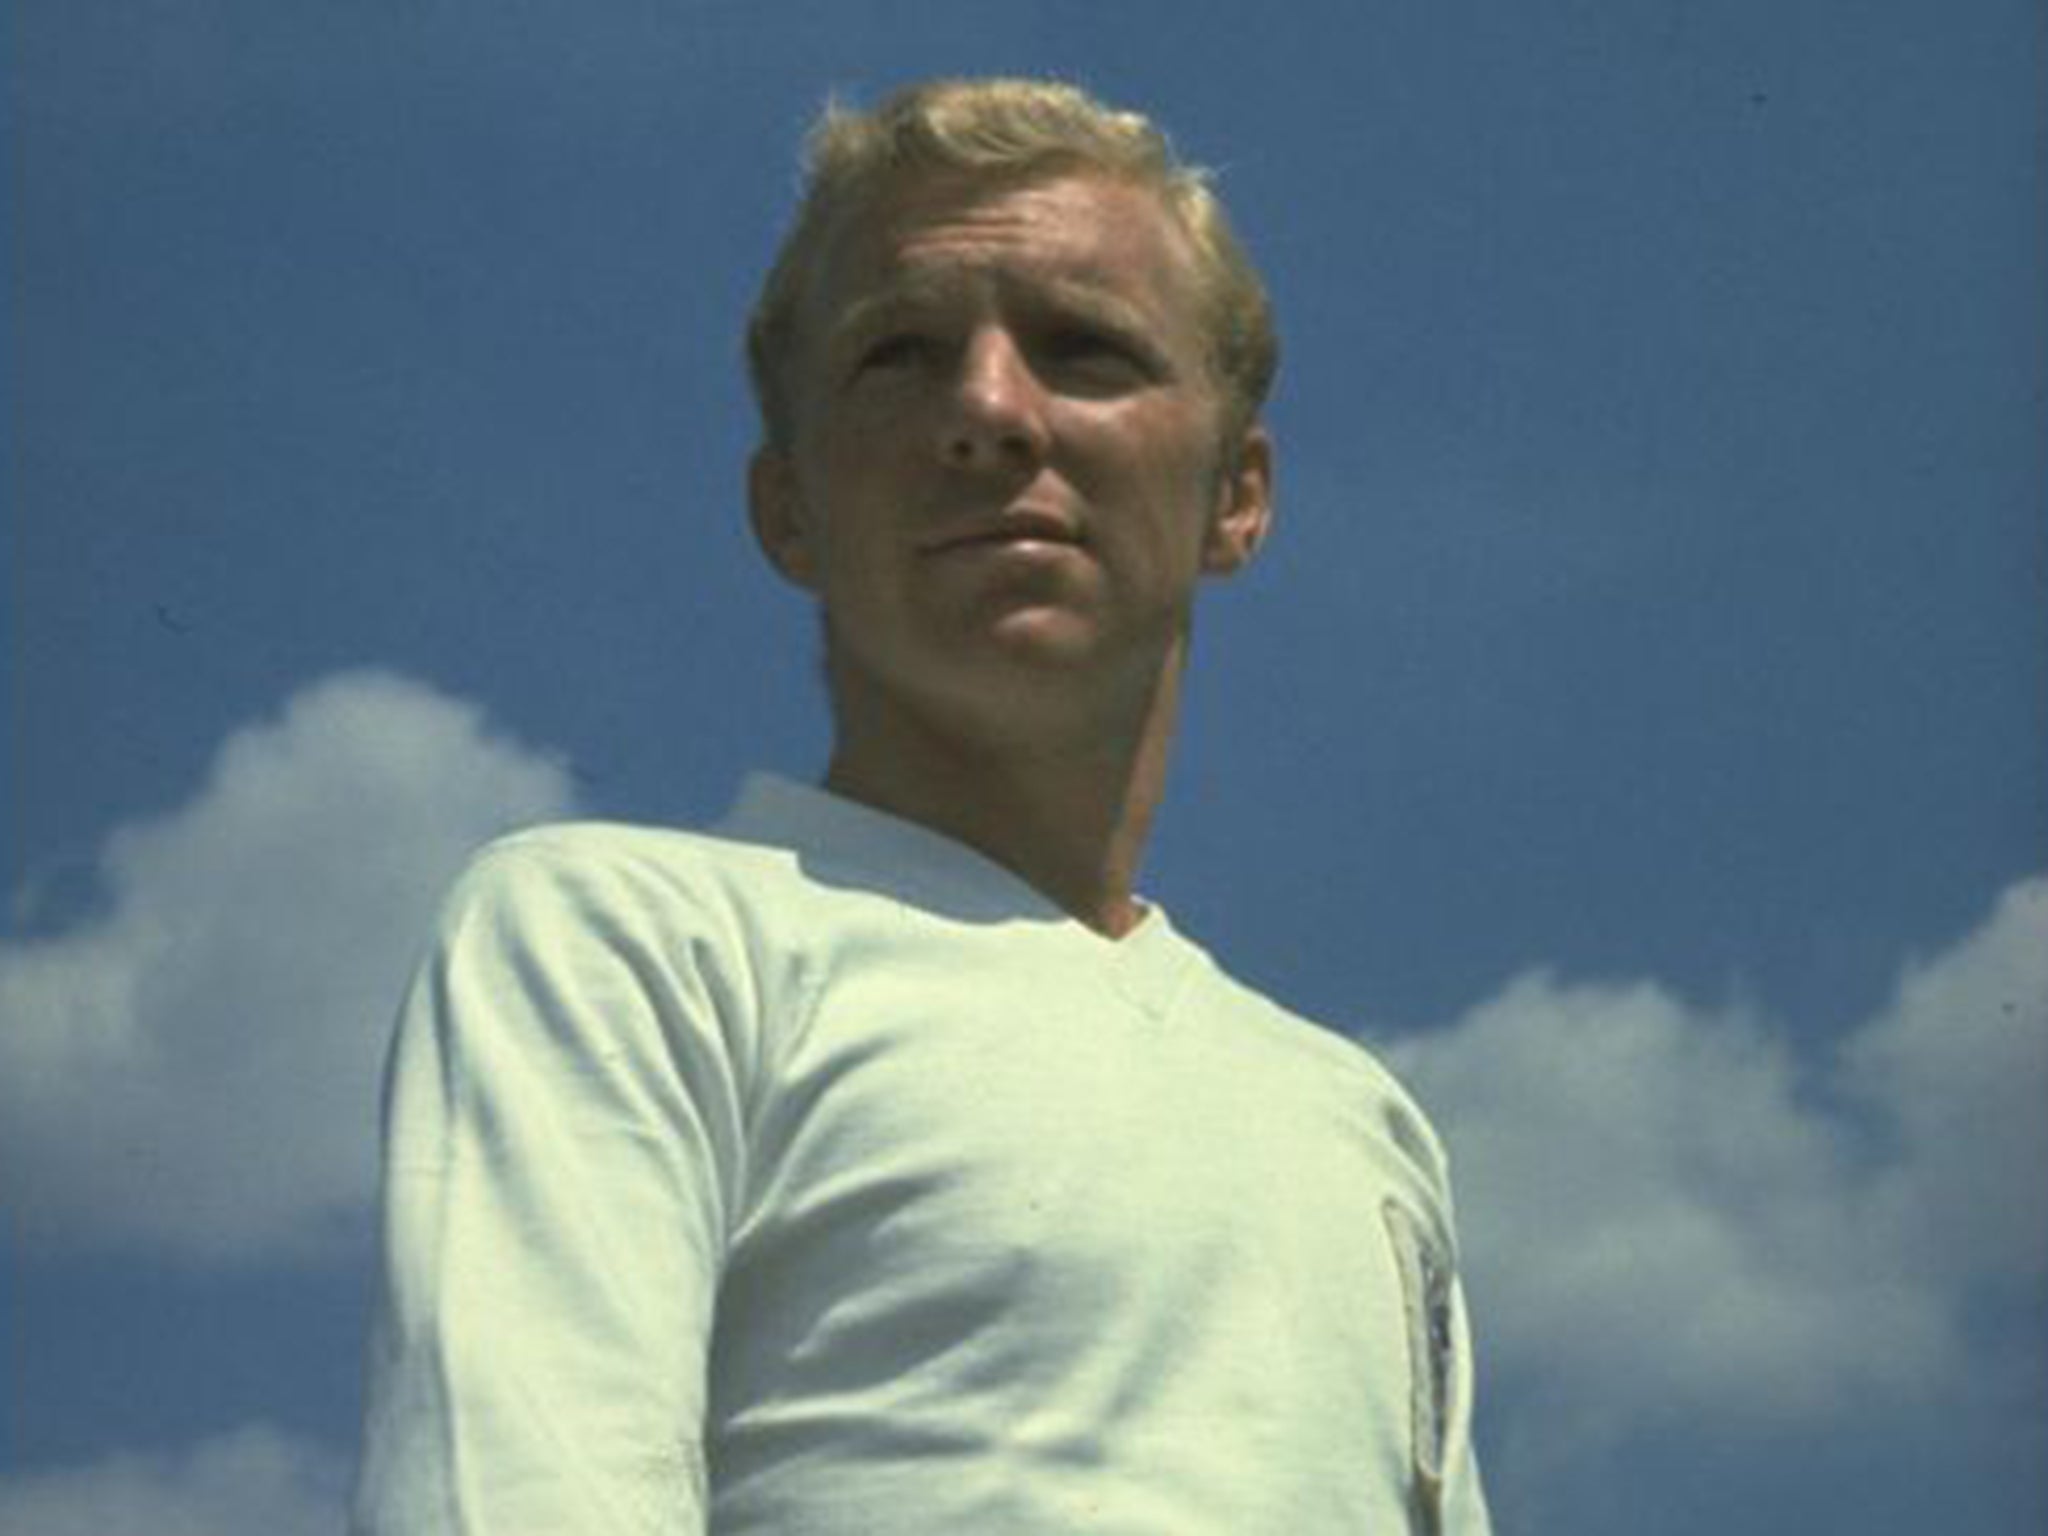 Bobby Moore was said to have had a fondness for dancing on tables and lowering his trousers during the course of bacchanalian post-match romps